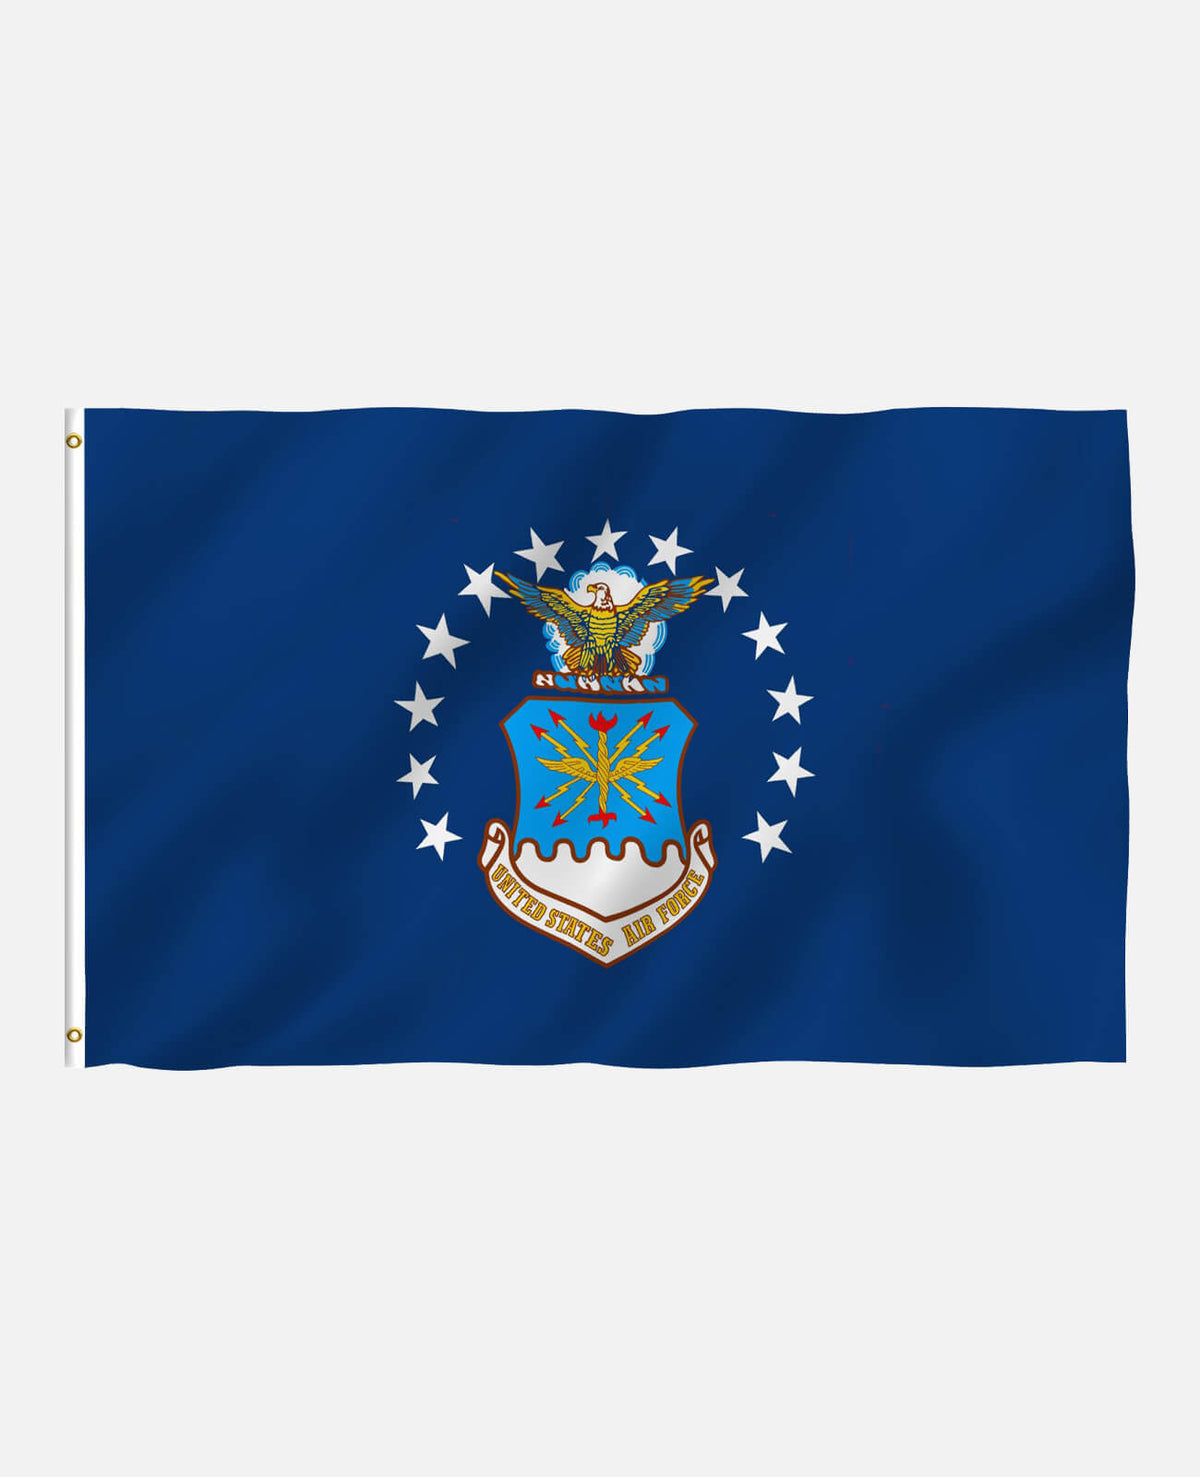 Flag of the United States Air Force,3’x5′ Polyester, High Durability, American Made